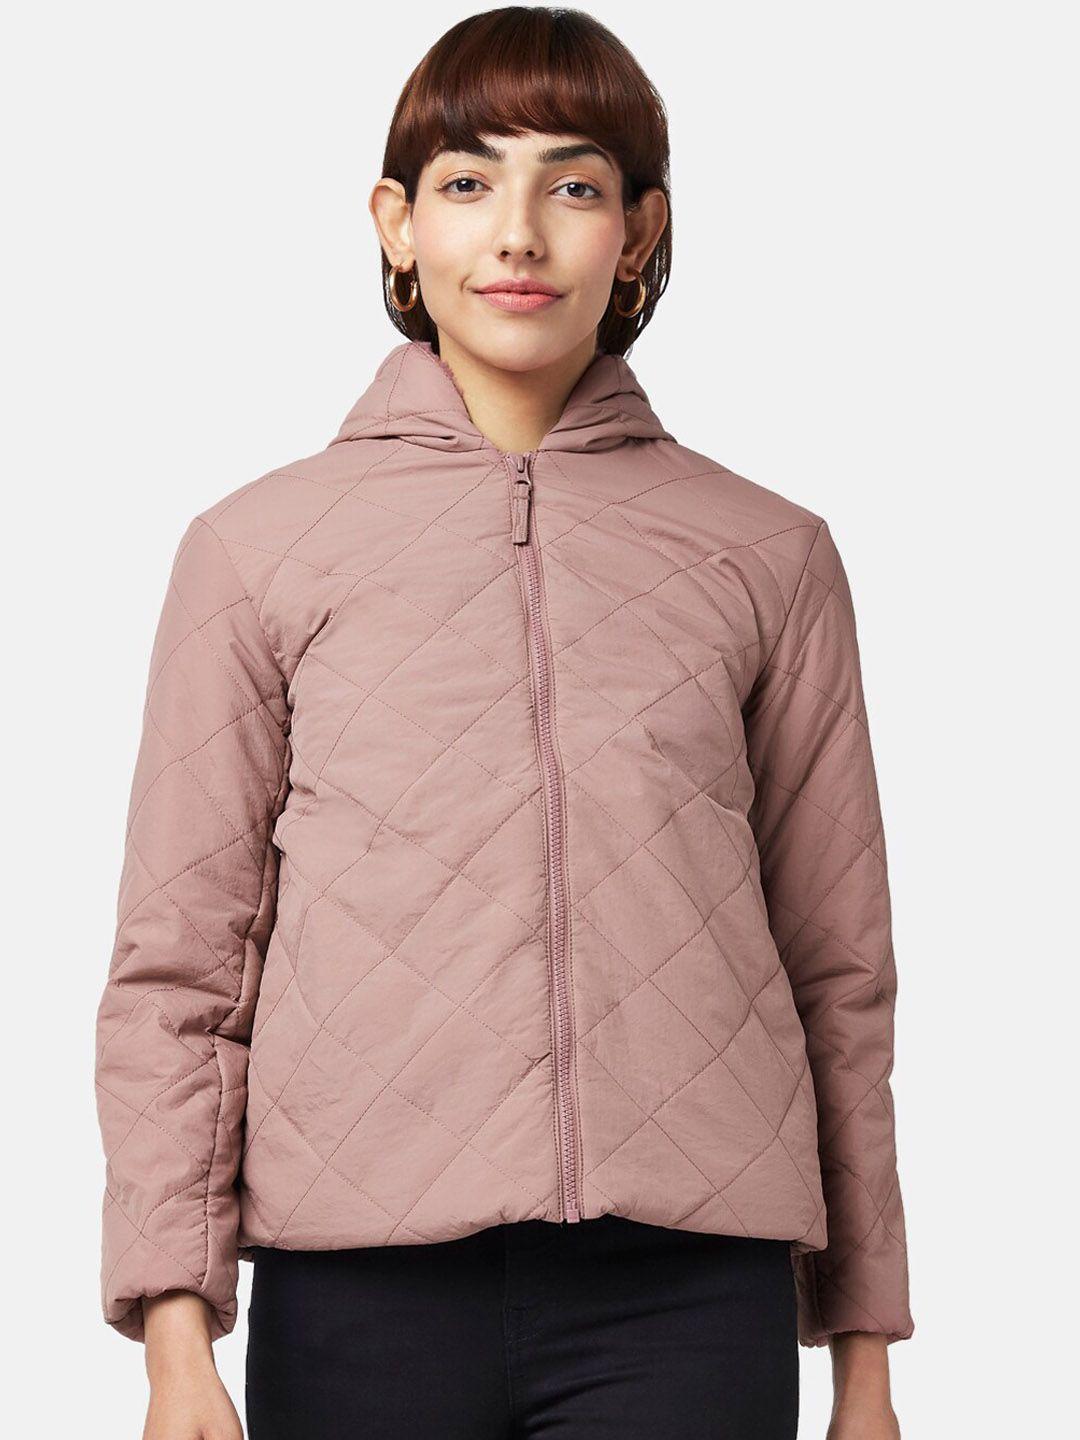 honey by pantaloons women pink quilted jacket